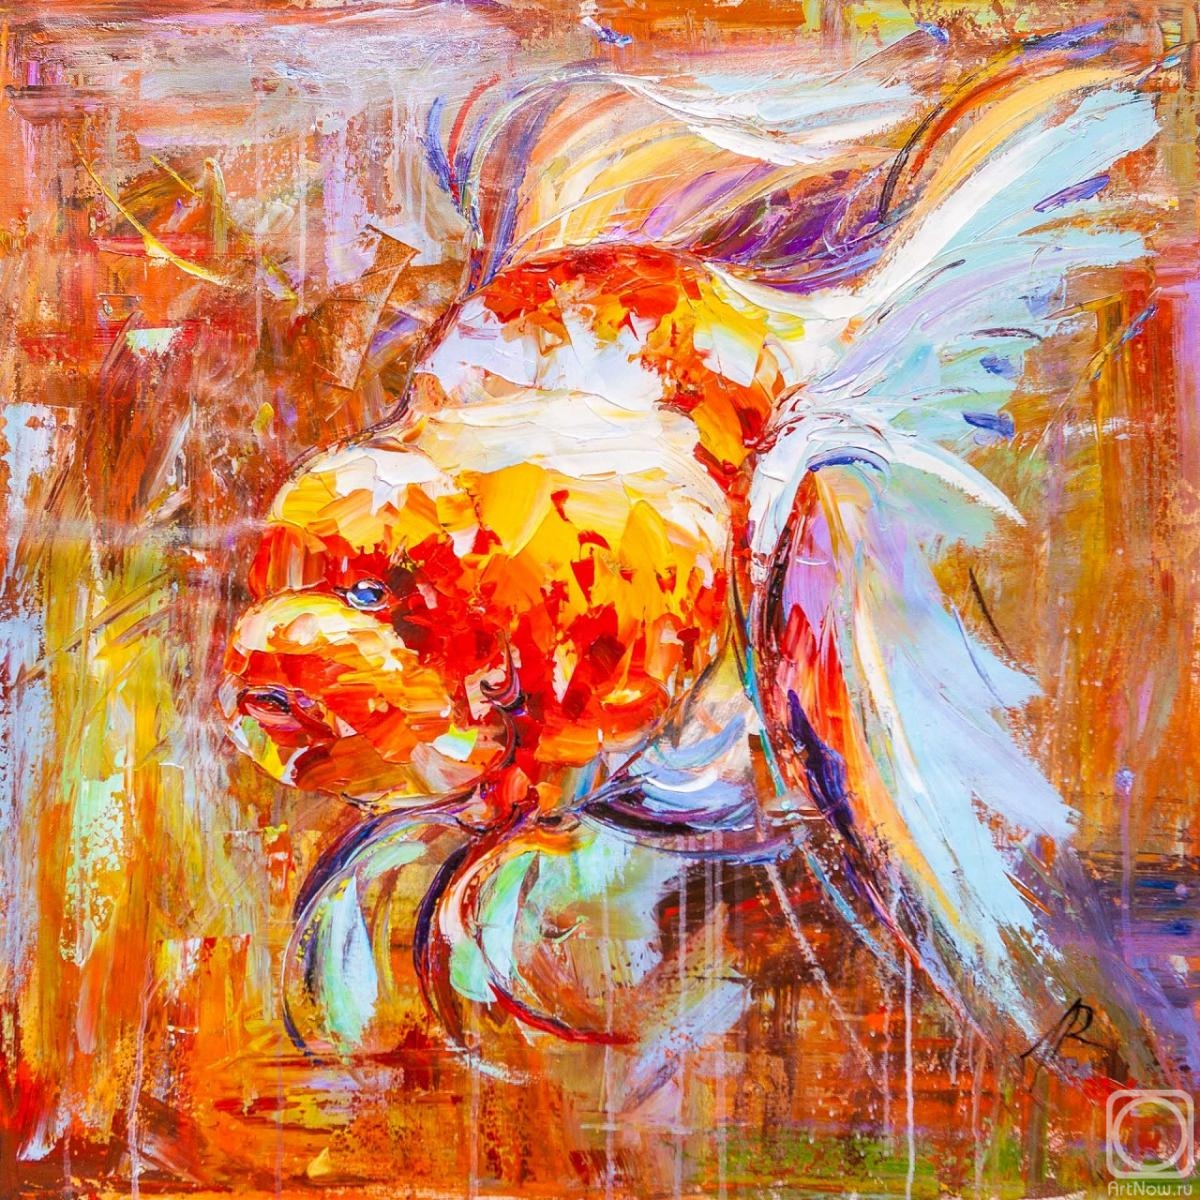 Rodries Jose. Goldfish for the fulfillment of desires. N4